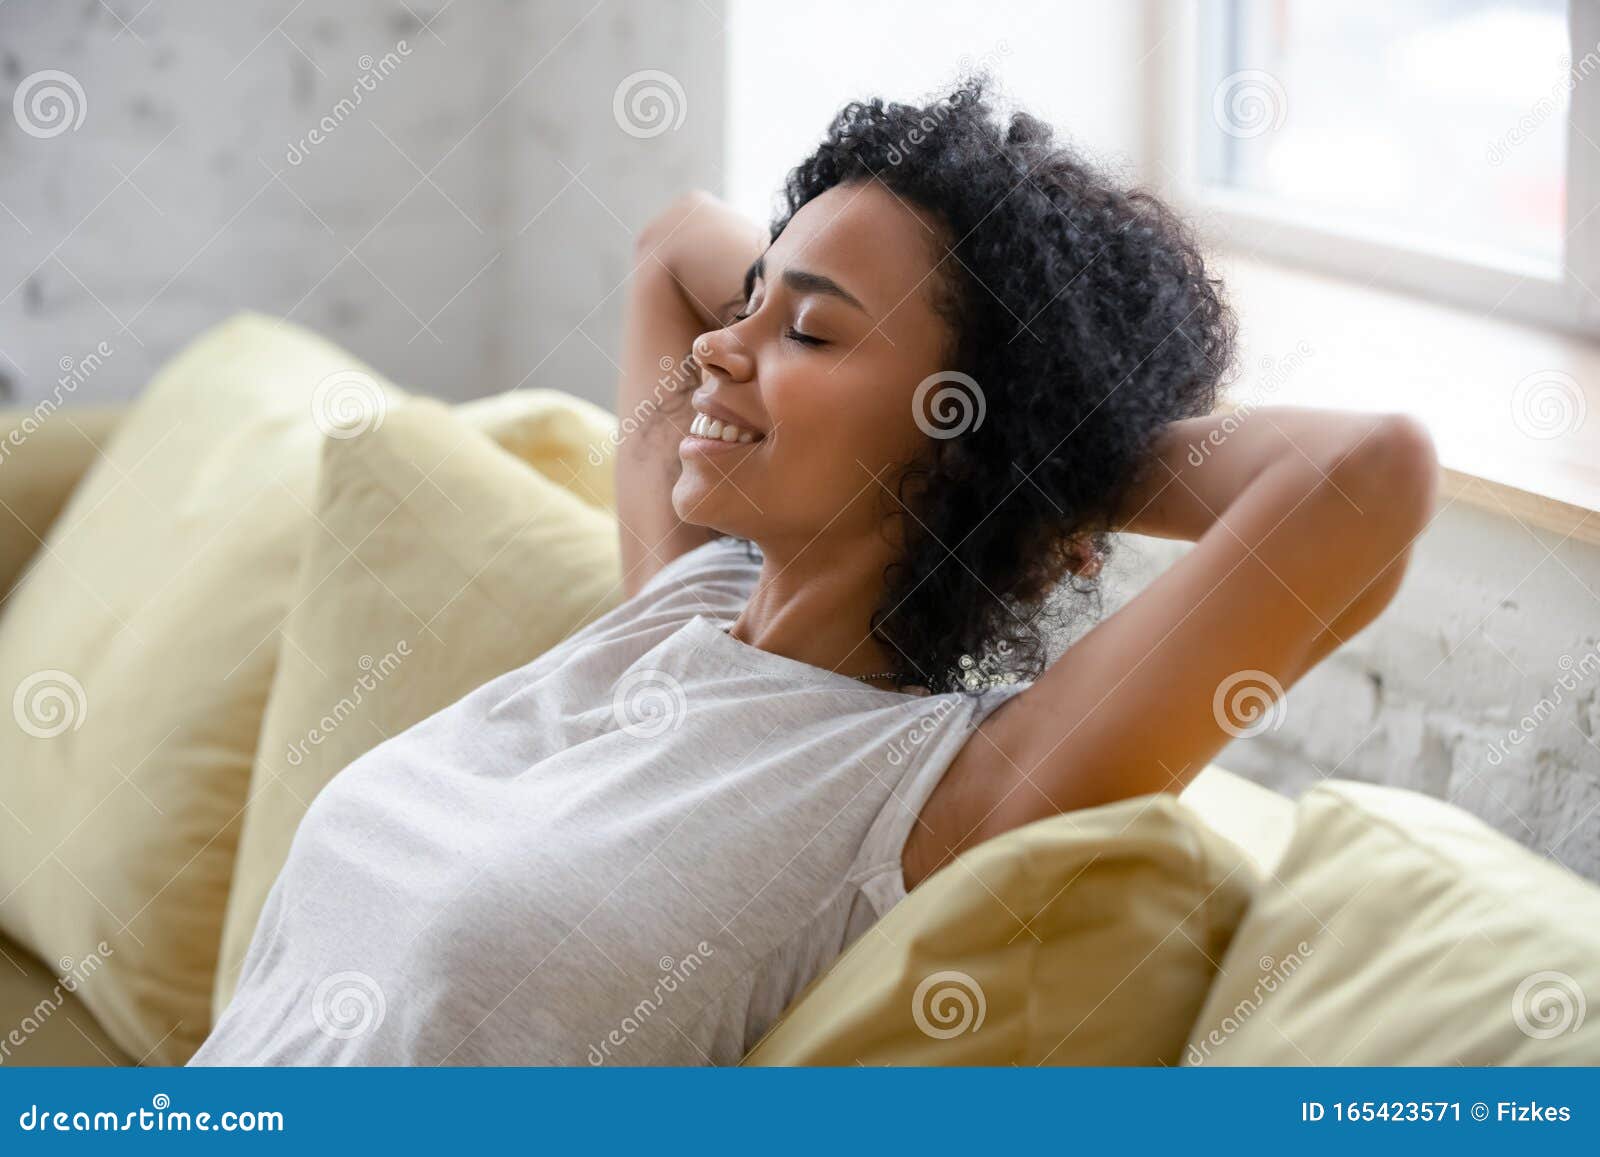 african american woman relax on comfortable couch at home